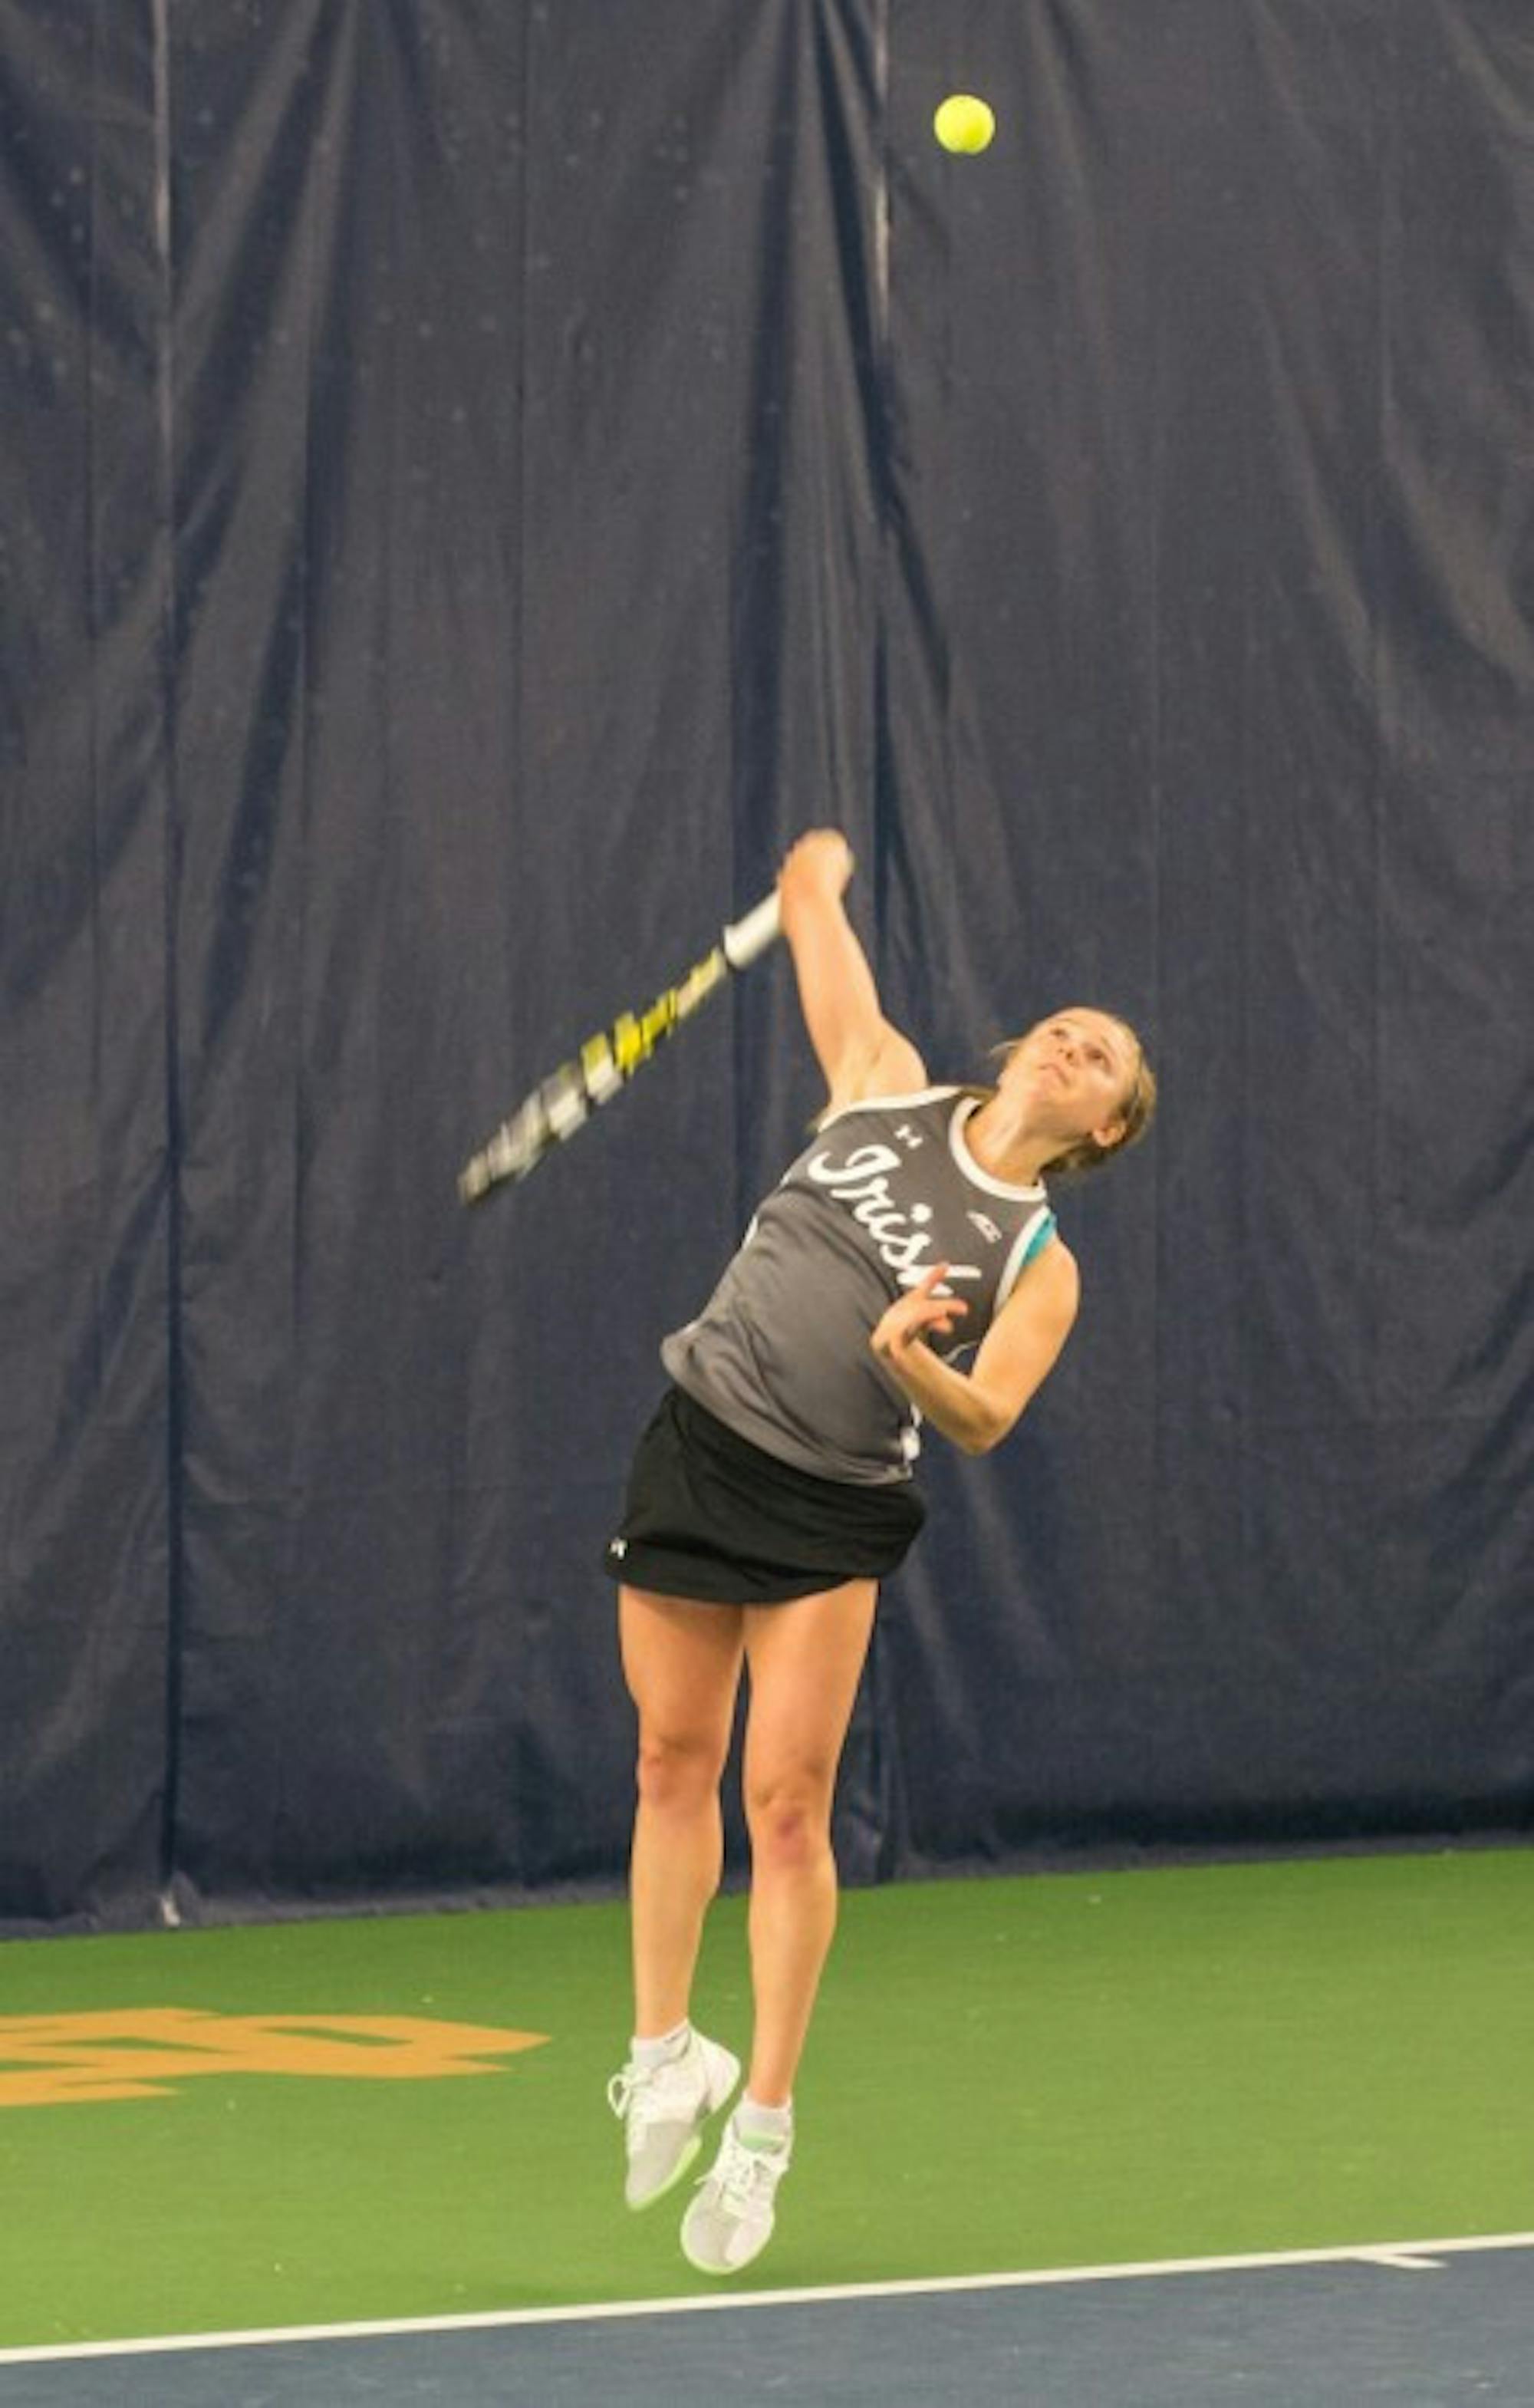 Irish junior Monica Robinson serves during Notre Dame’s 6-1 win over Indiana on Feb. 20 at Eck Tennis Pavilion.